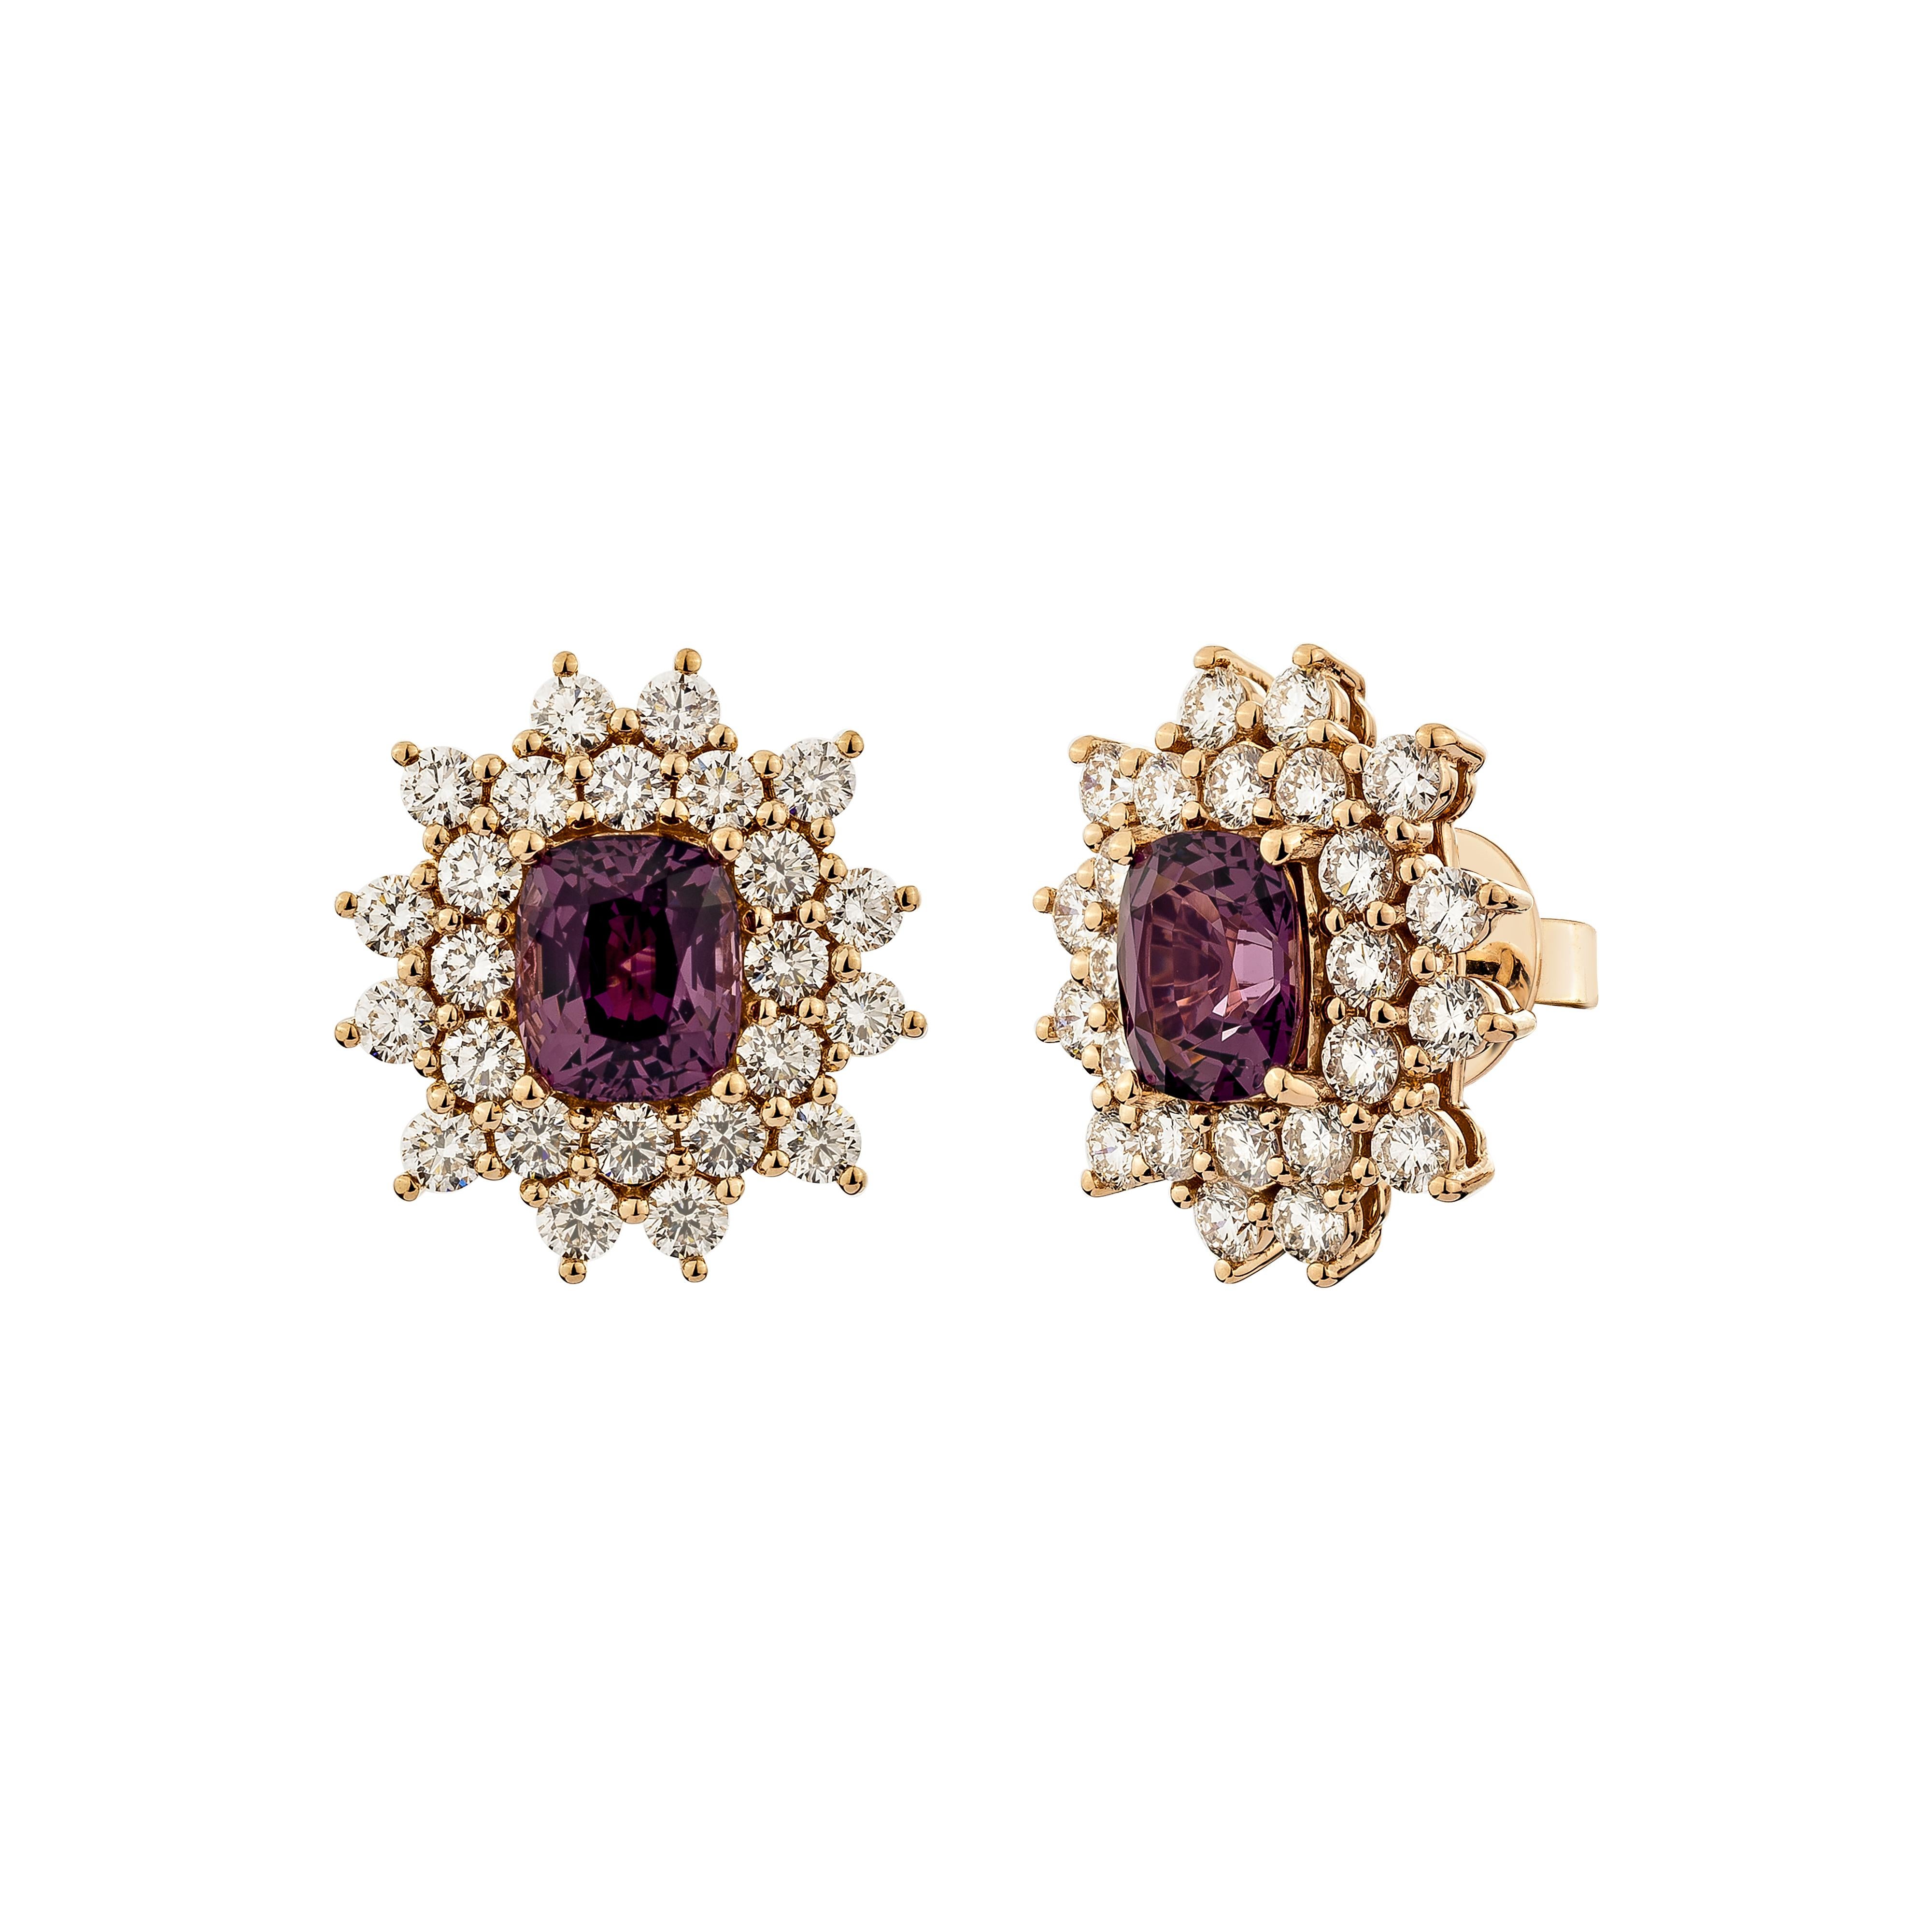 Cushion Cut 3.82 carat Spinel stud Earrings in 18Karat Rose Gold with White Diamond. For Sale